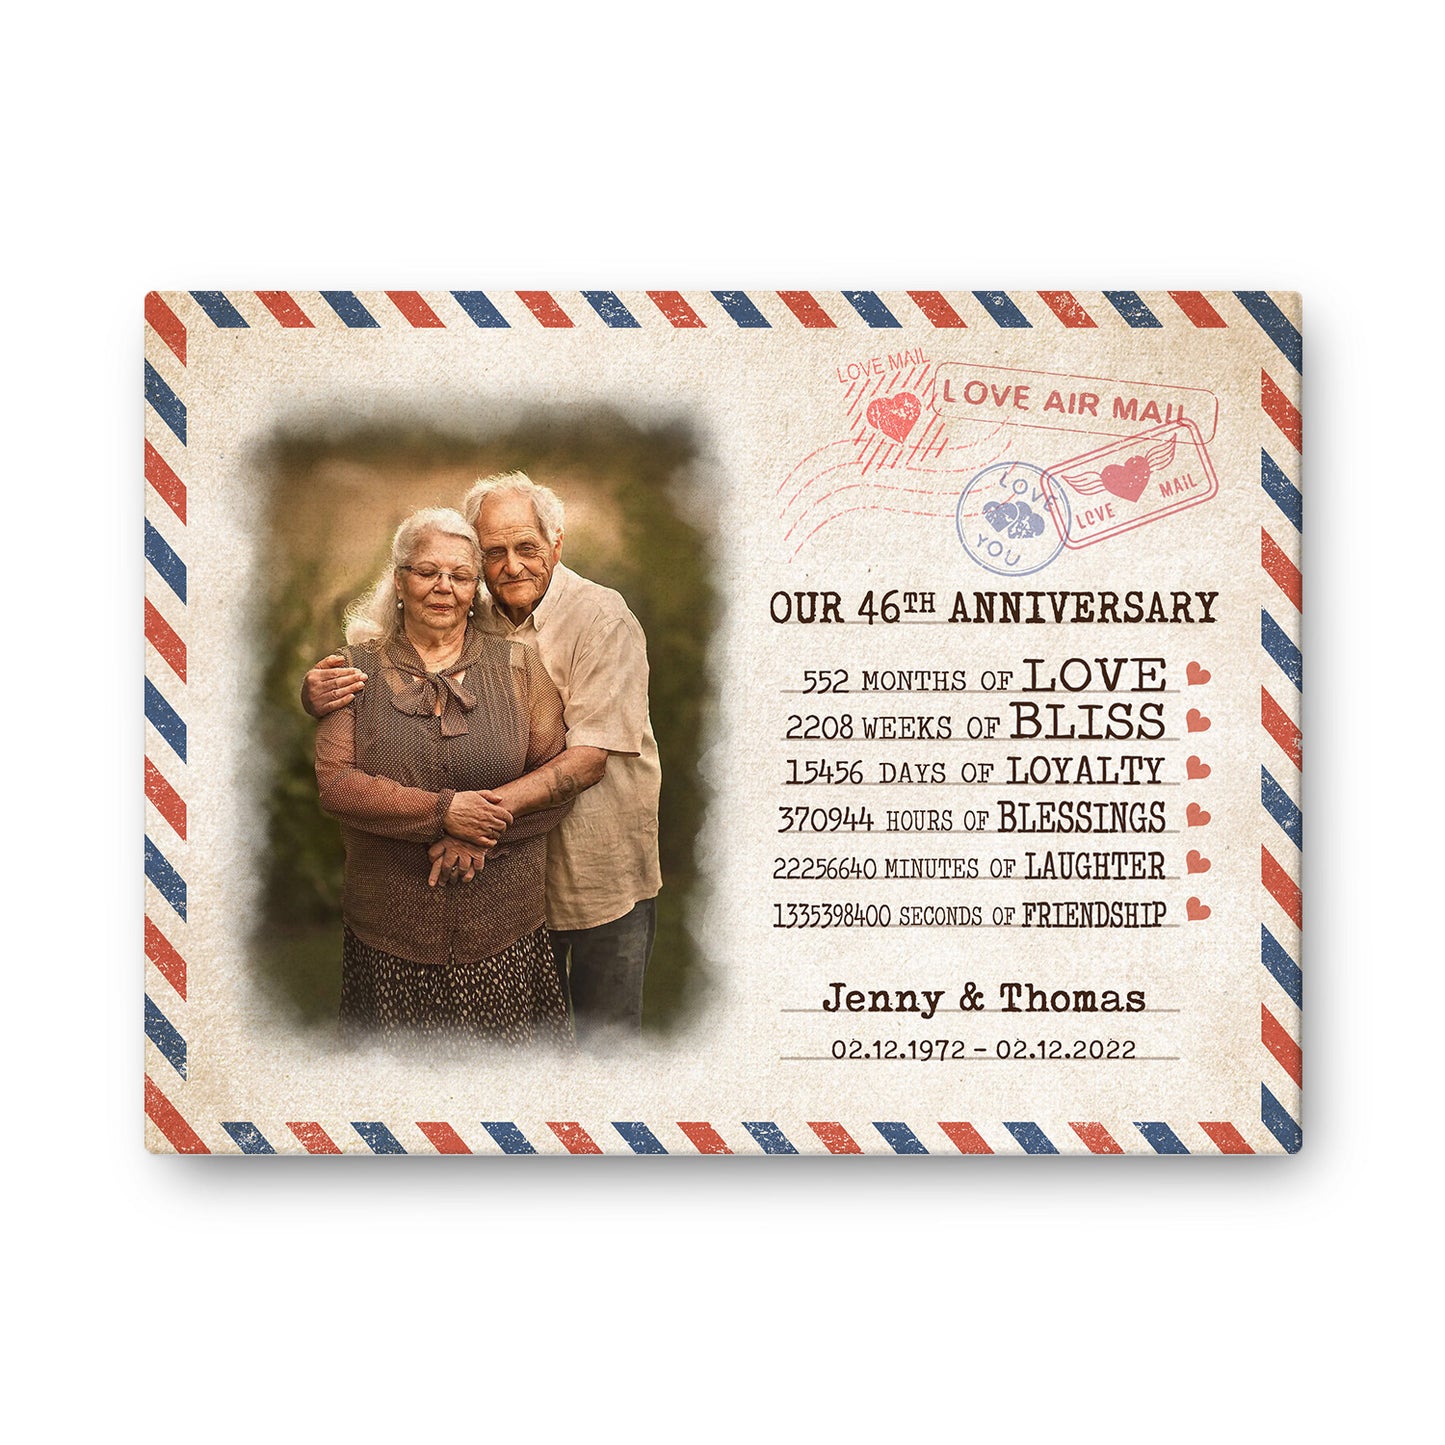 Our 46th Anniversary Letter Valentine Gift Personalized Canvas